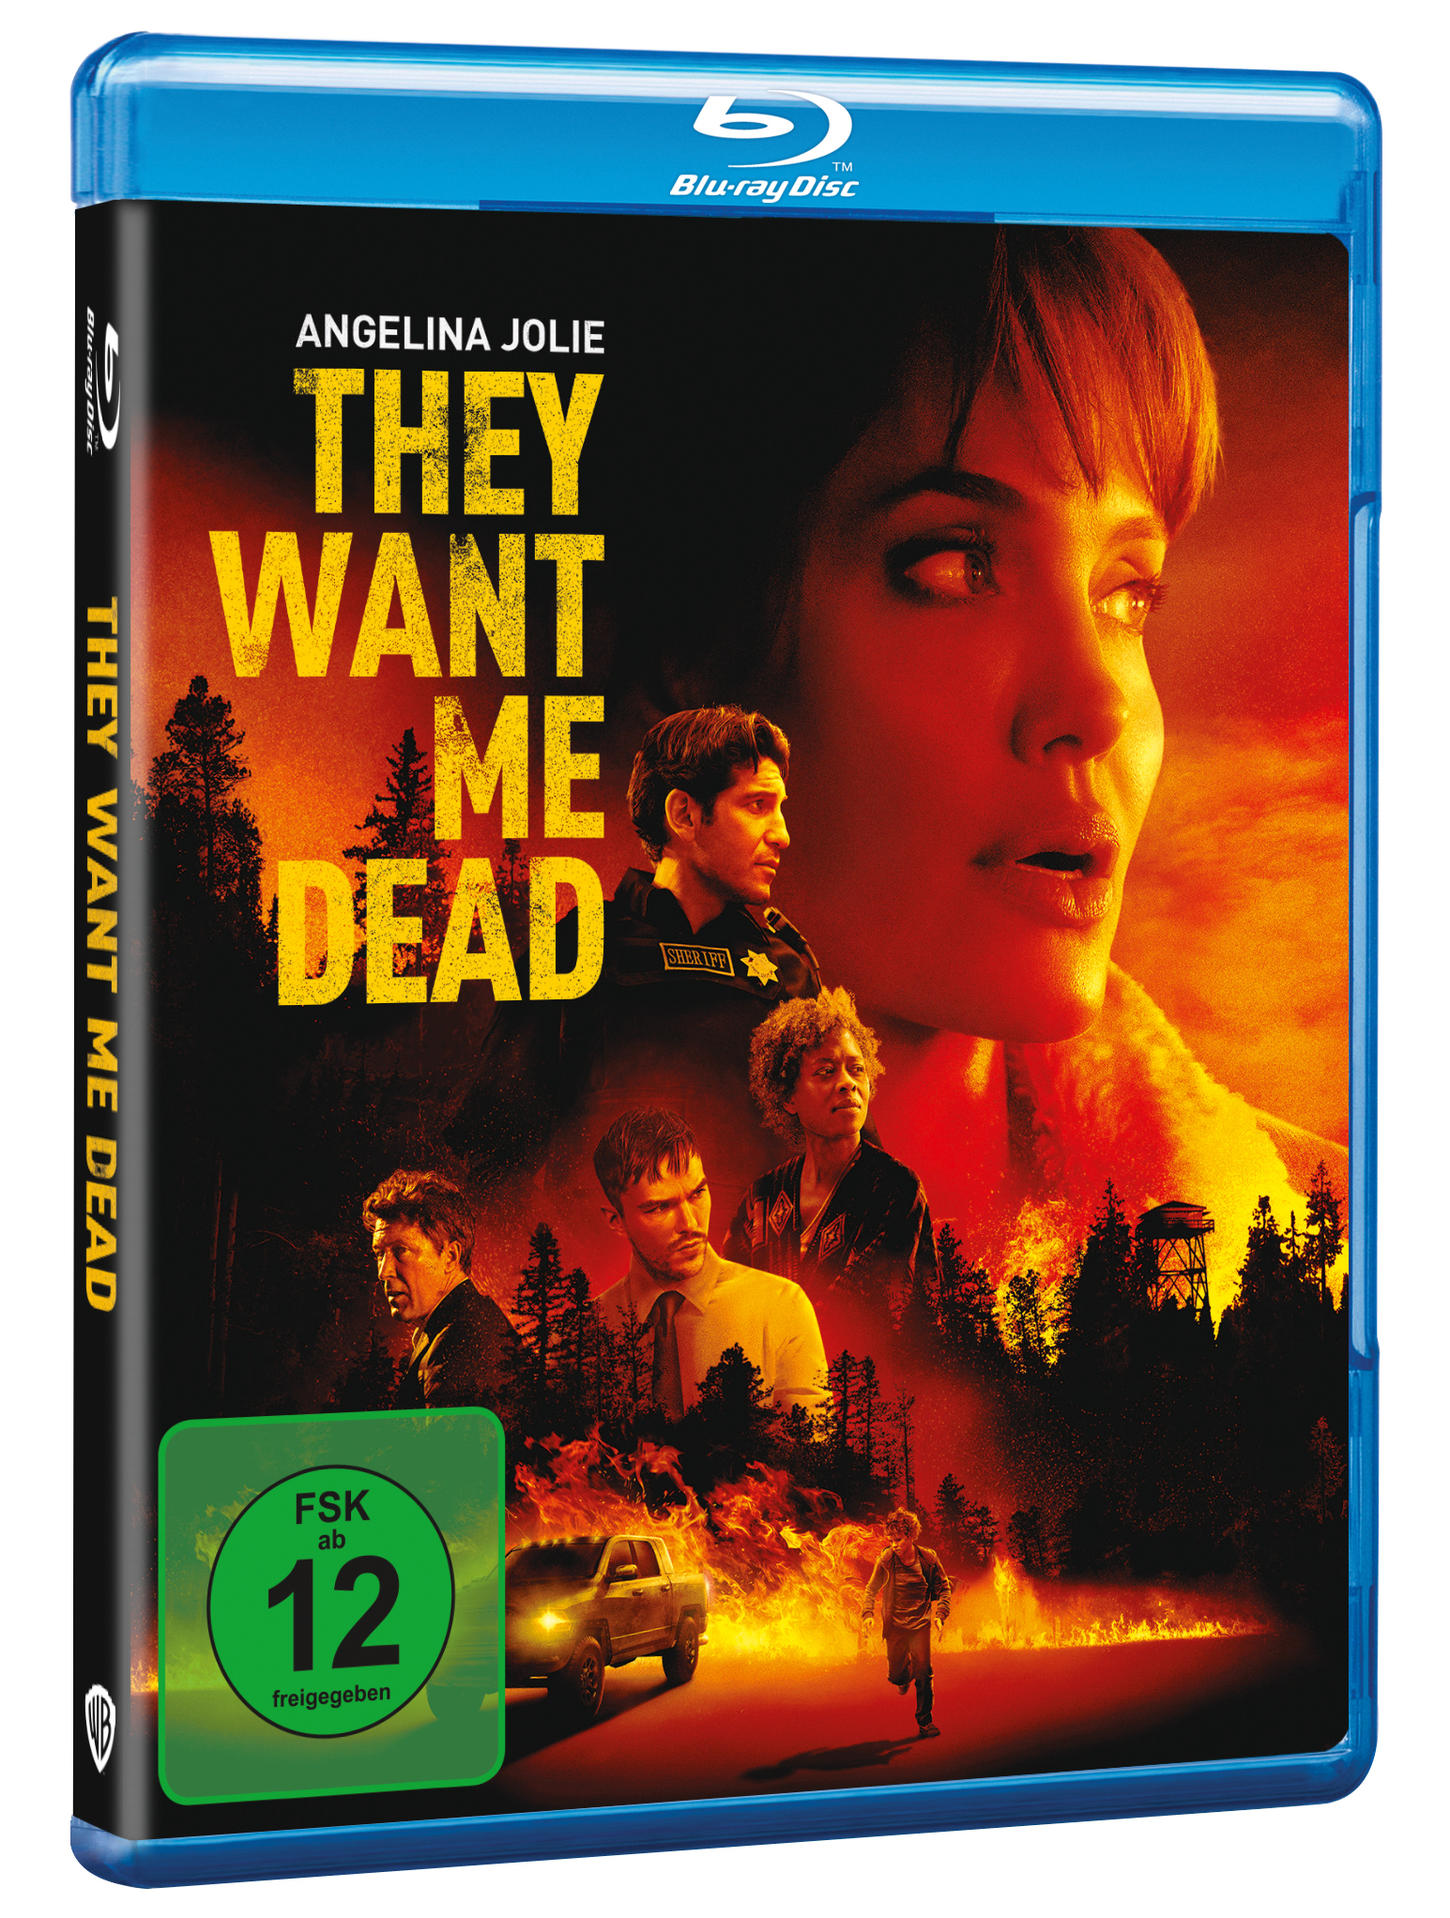 Dead Blu-ray Want Me They